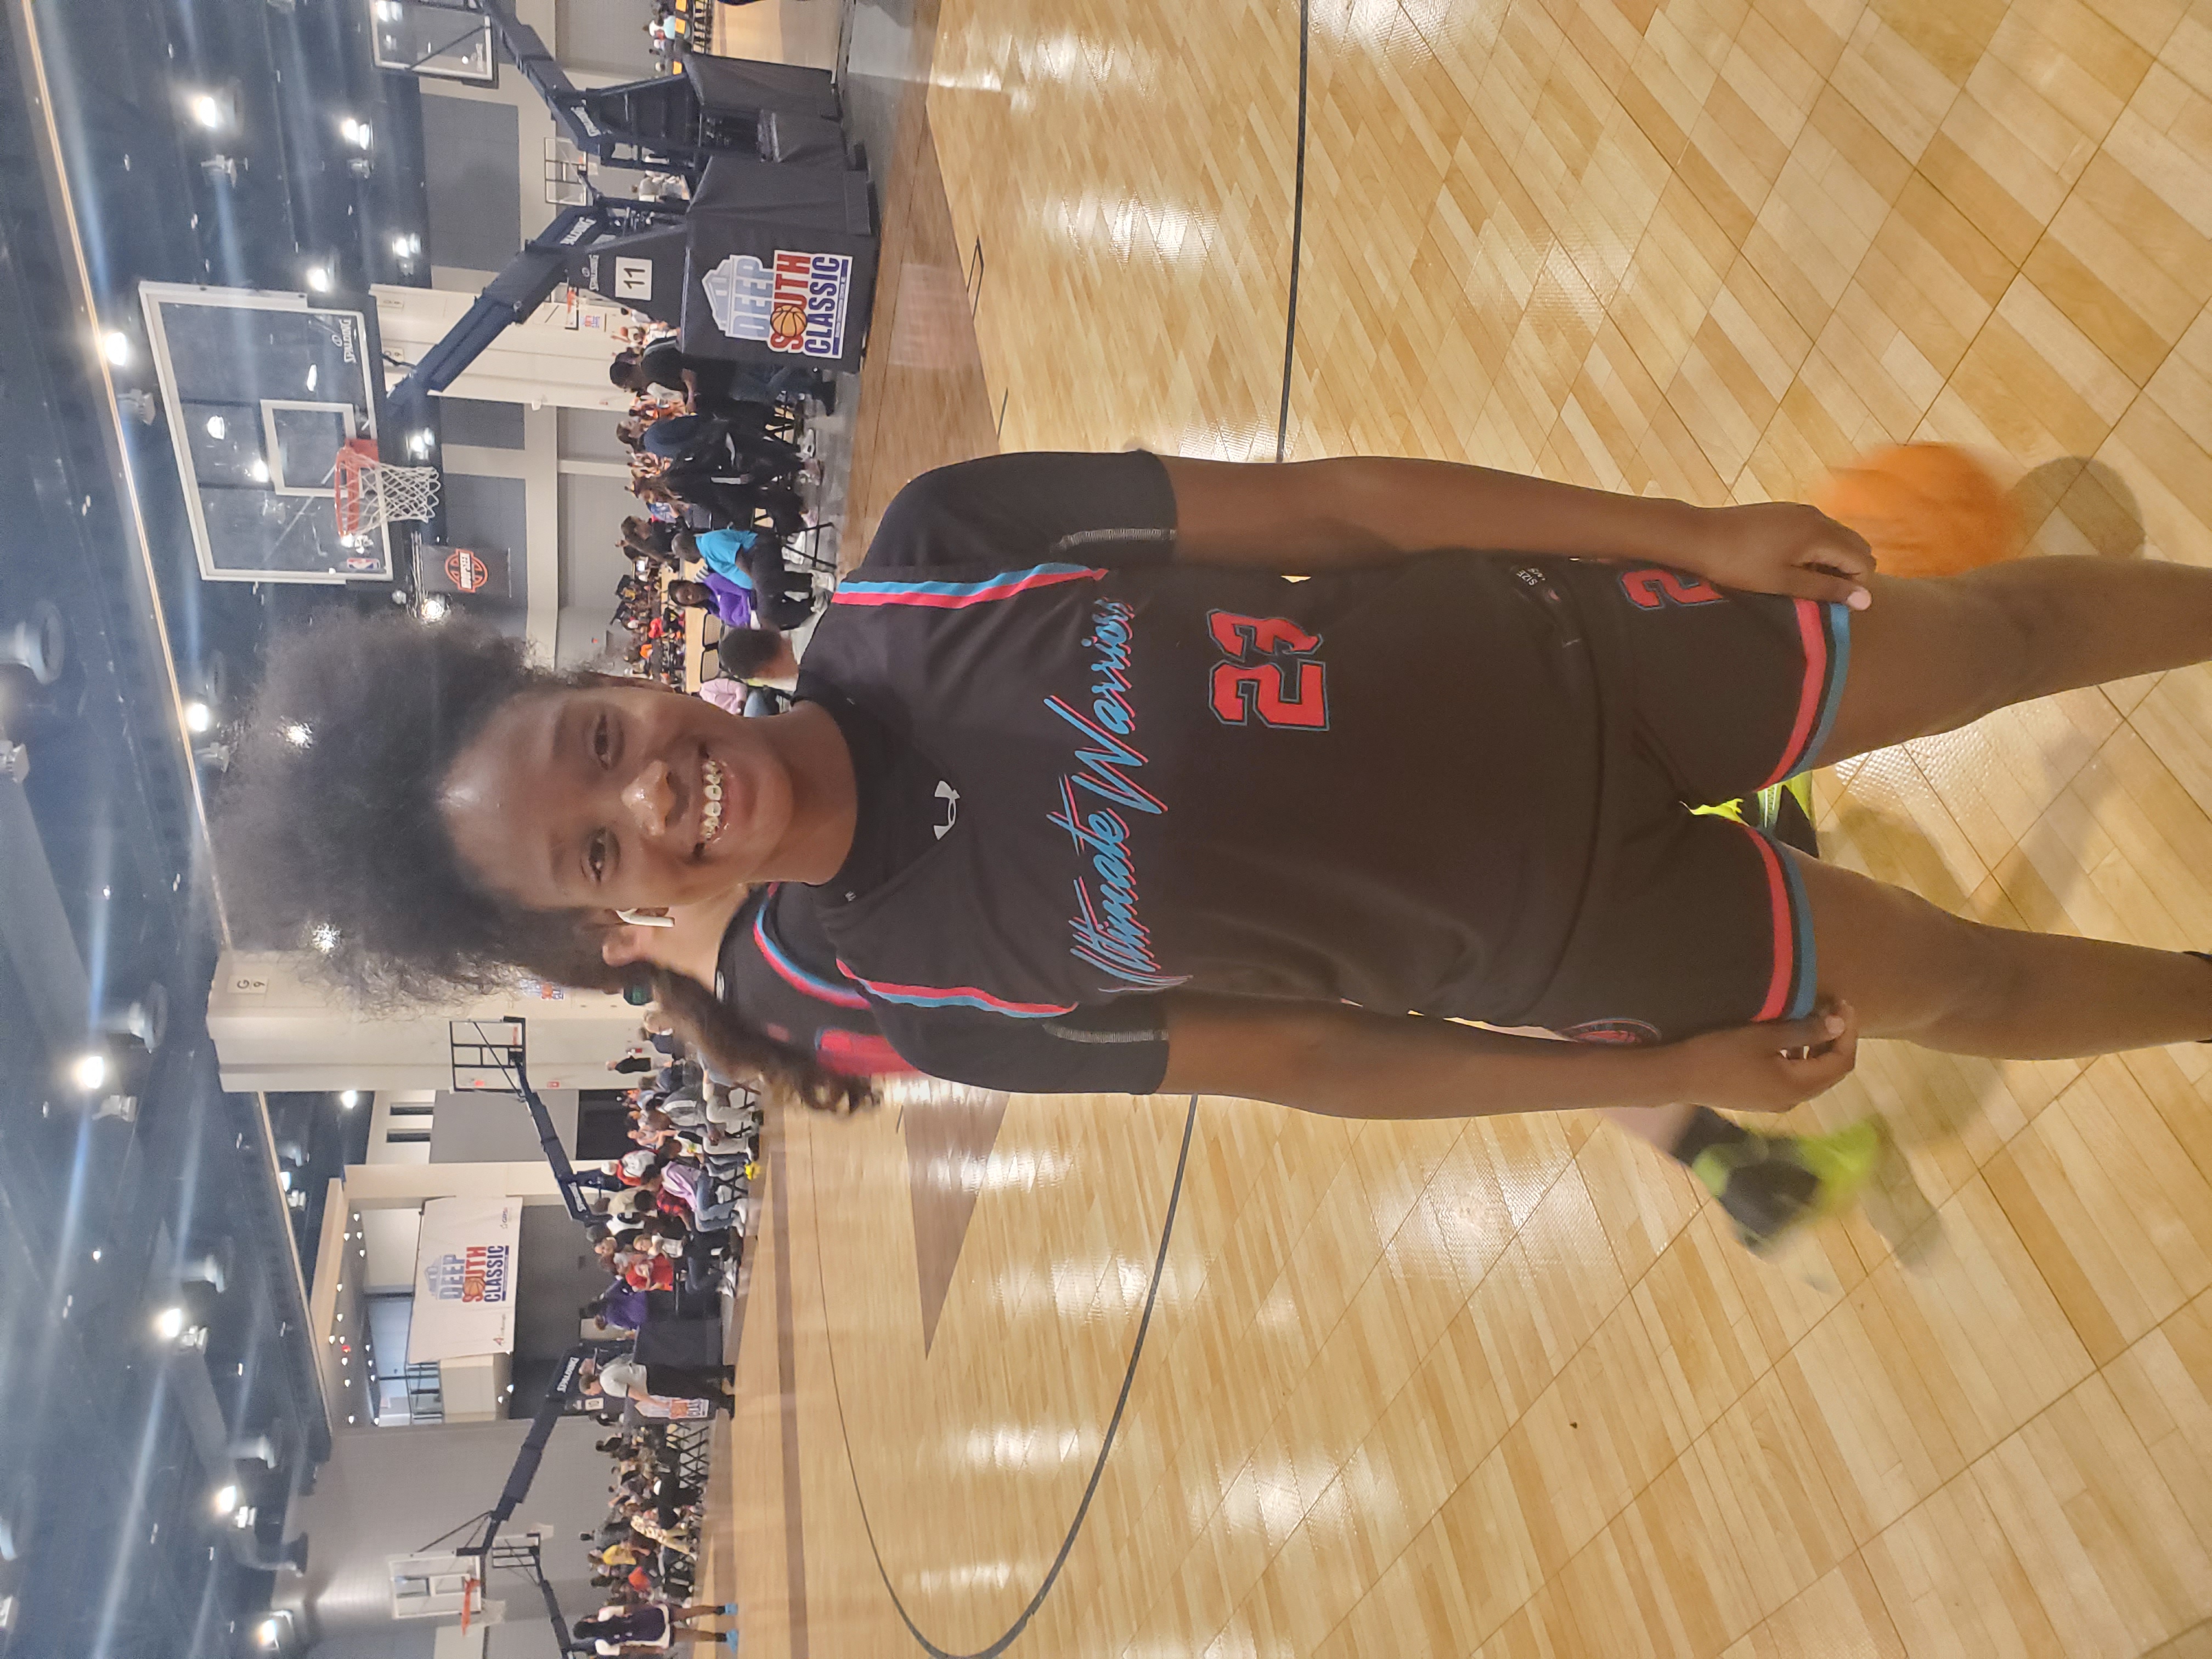 <span class="pn-tooltip pn-player-link">
        <span class="name-pointer">2025 Standout Forwards at Deep South Classic</span>
        <span class="info-box not-prose" style="background: linear-gradient(to bottom, rgba(1,183,255, 0.95) 0%,rgba(1,183,255, 1) 100%)">
            <a href="https://prepgirlshoops.com/2023/04/2025-standout-forwards-at-deep-south-classic/" class="link-wrap">
                                    <span class="player-img"><img src="https://prepgirlshoops.com/wp-content/uploads/sites/4/2023/04/20230423_132013.jpg?w=150&h=150&crop=1" alt="2025 Standout Forwards at Deep South Classic"></span>
                
                <span class="player-details">
                    <span class="first-name">2025</span>
                    <span class="last-name">Standout Forwards at Deep South Classic</span>
                    <span class="measurables">
                                            </span>
                                    </span>
                <span class="player-rank">
                                                        </span>
                                    <span class="state-abbr"></span>
                            </a>

            
        </span>
    </span>
